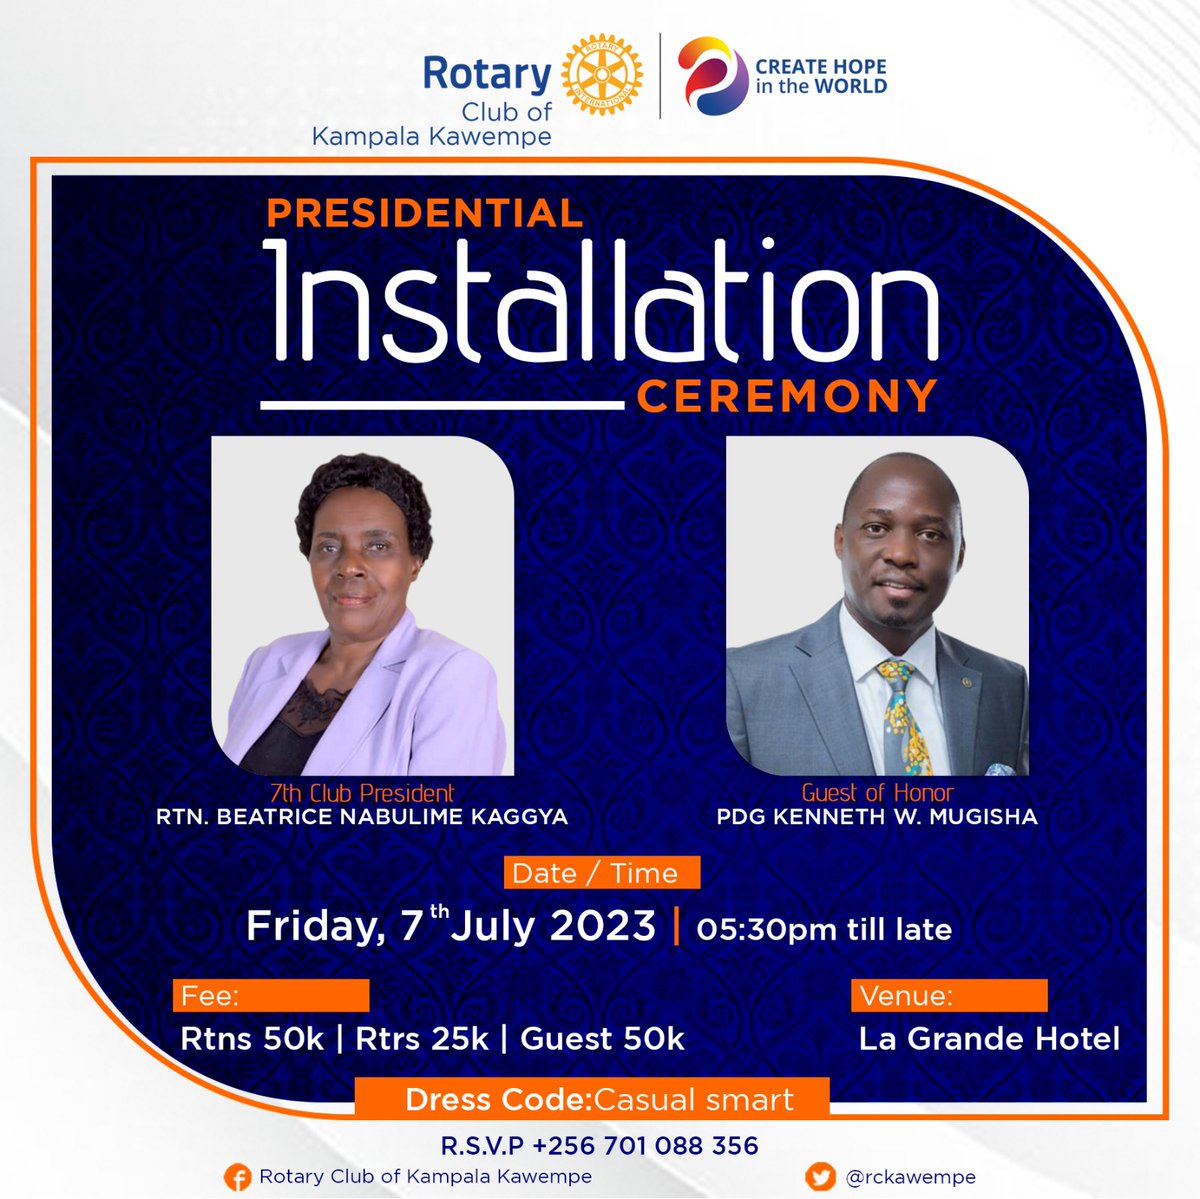 The Amazing president together with members and friends of the rotary club of Kampala kawempe wish to invite rotarians, rotaractors and guests to our presidential installation for the year 2023/24. This will be an occasion of celebration of service and creating hope.